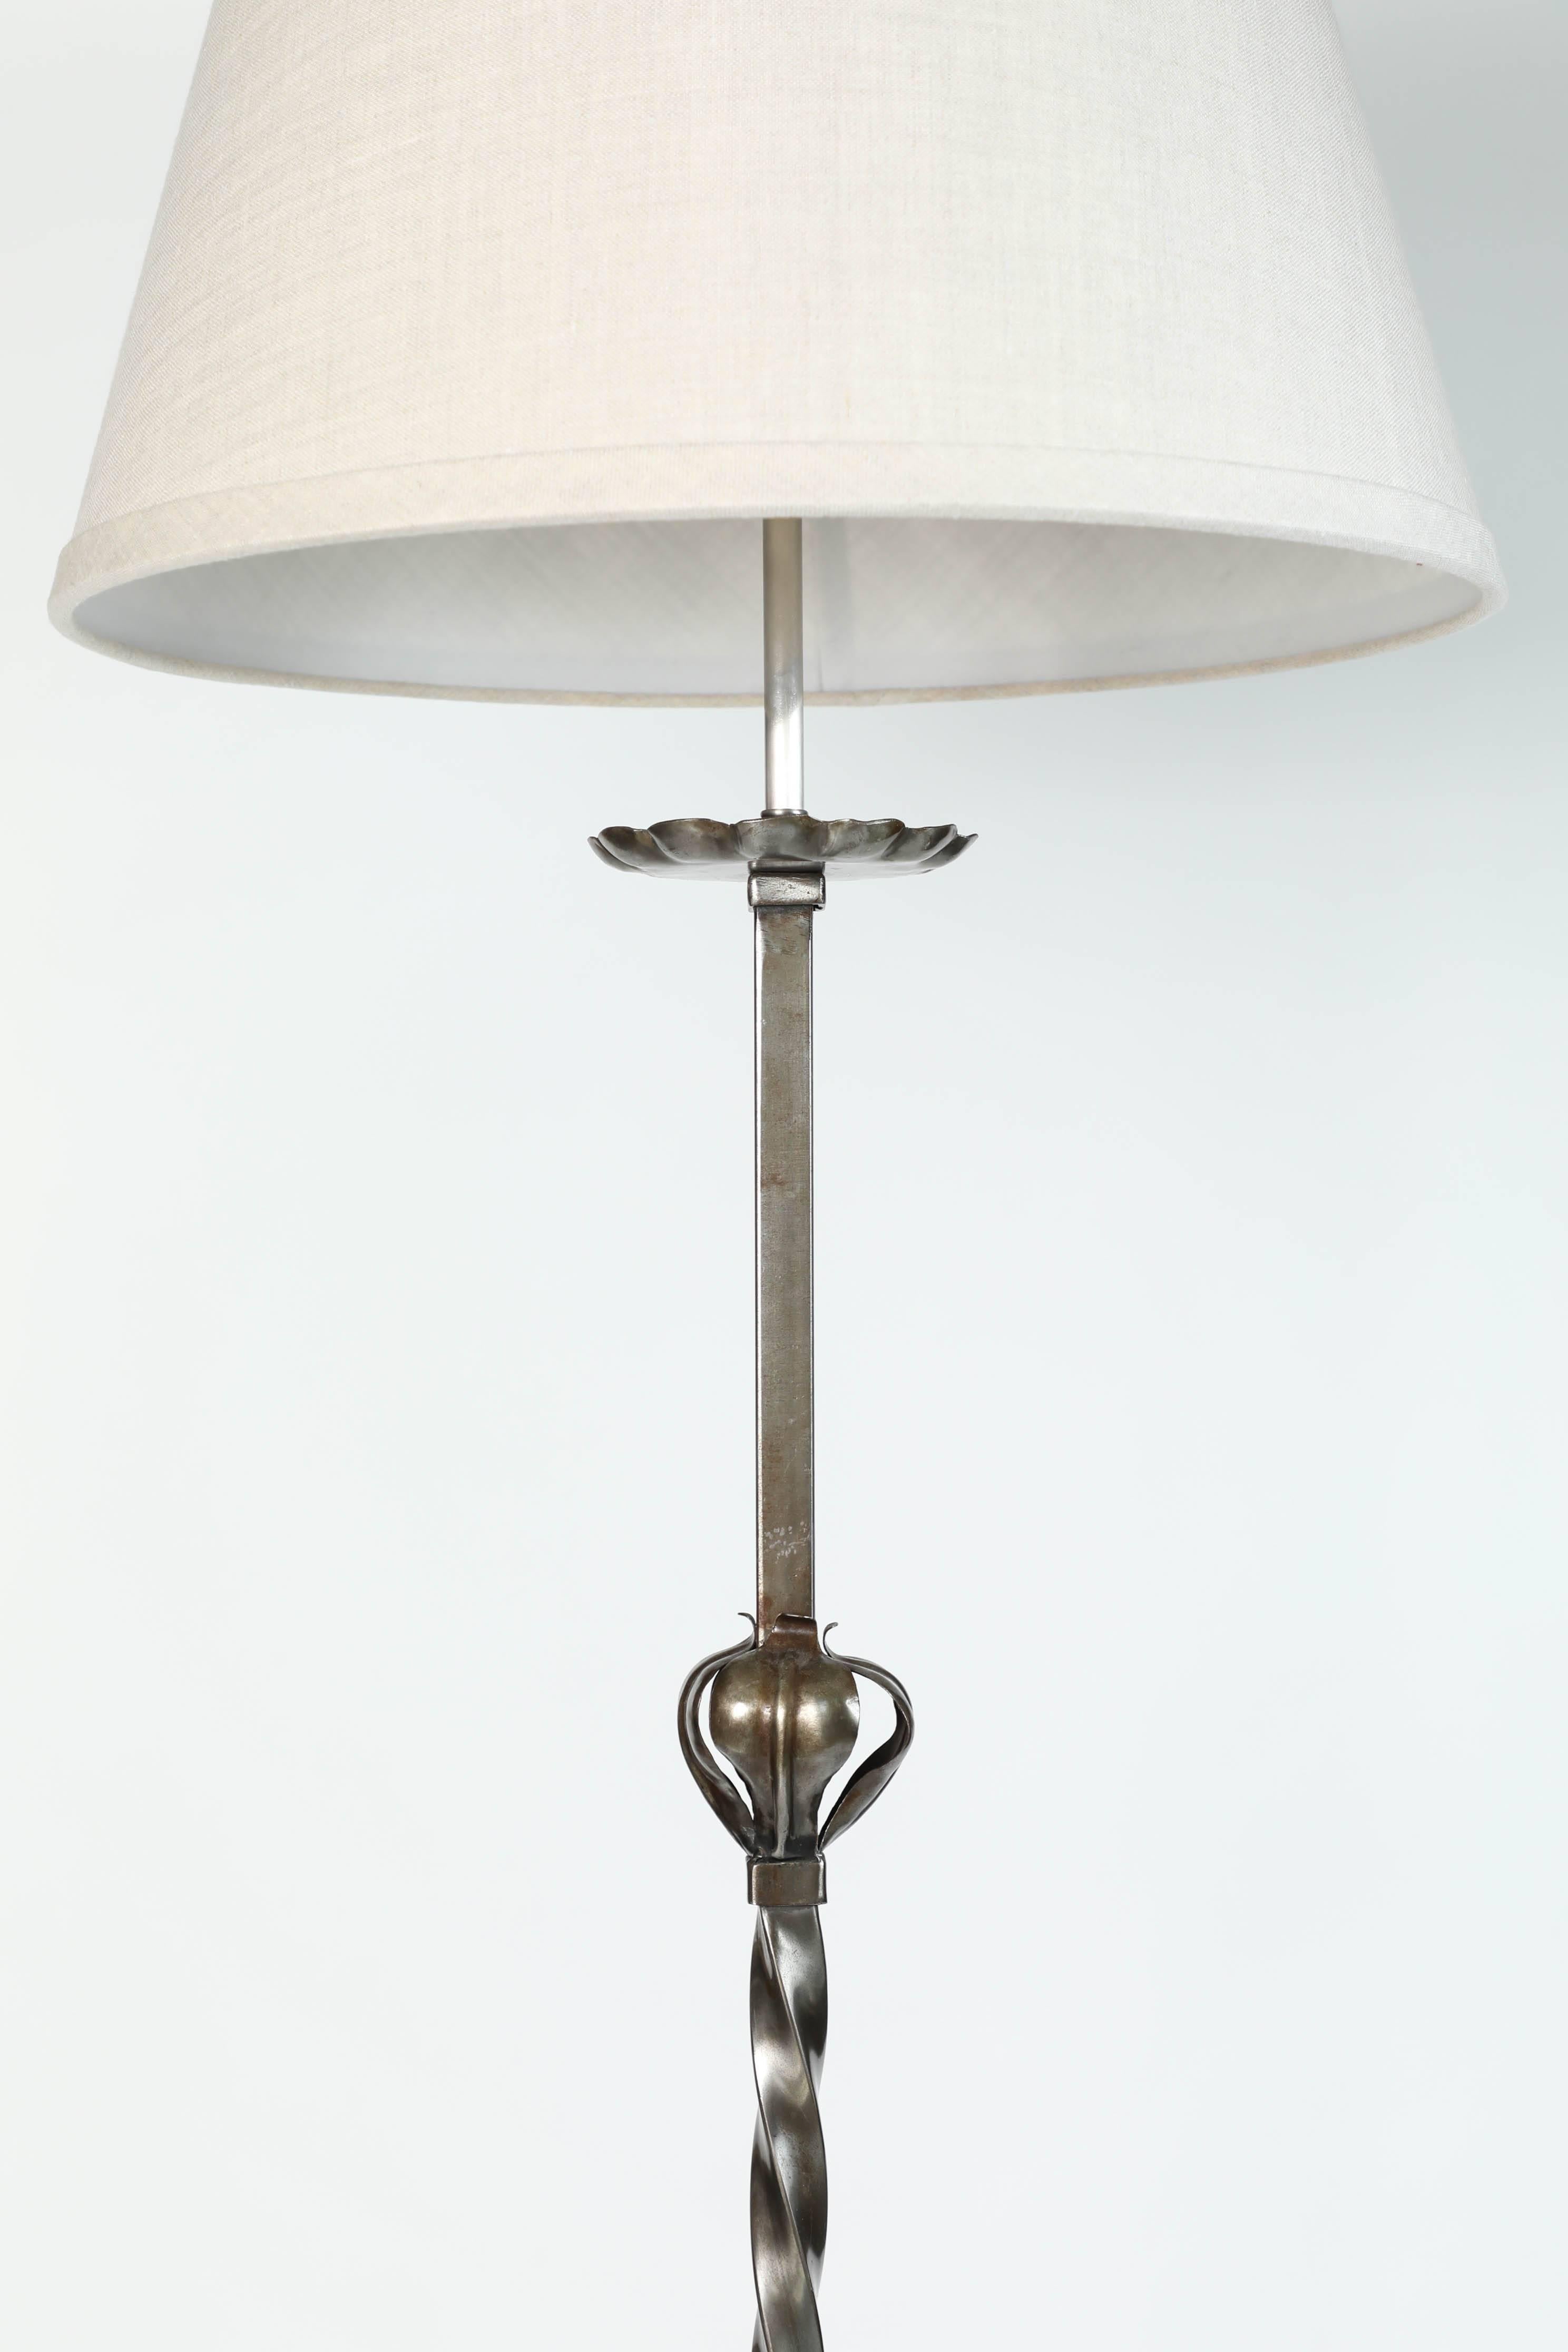 20th Century Vintage French Iron Floor Lamp with Aged Silver Finish